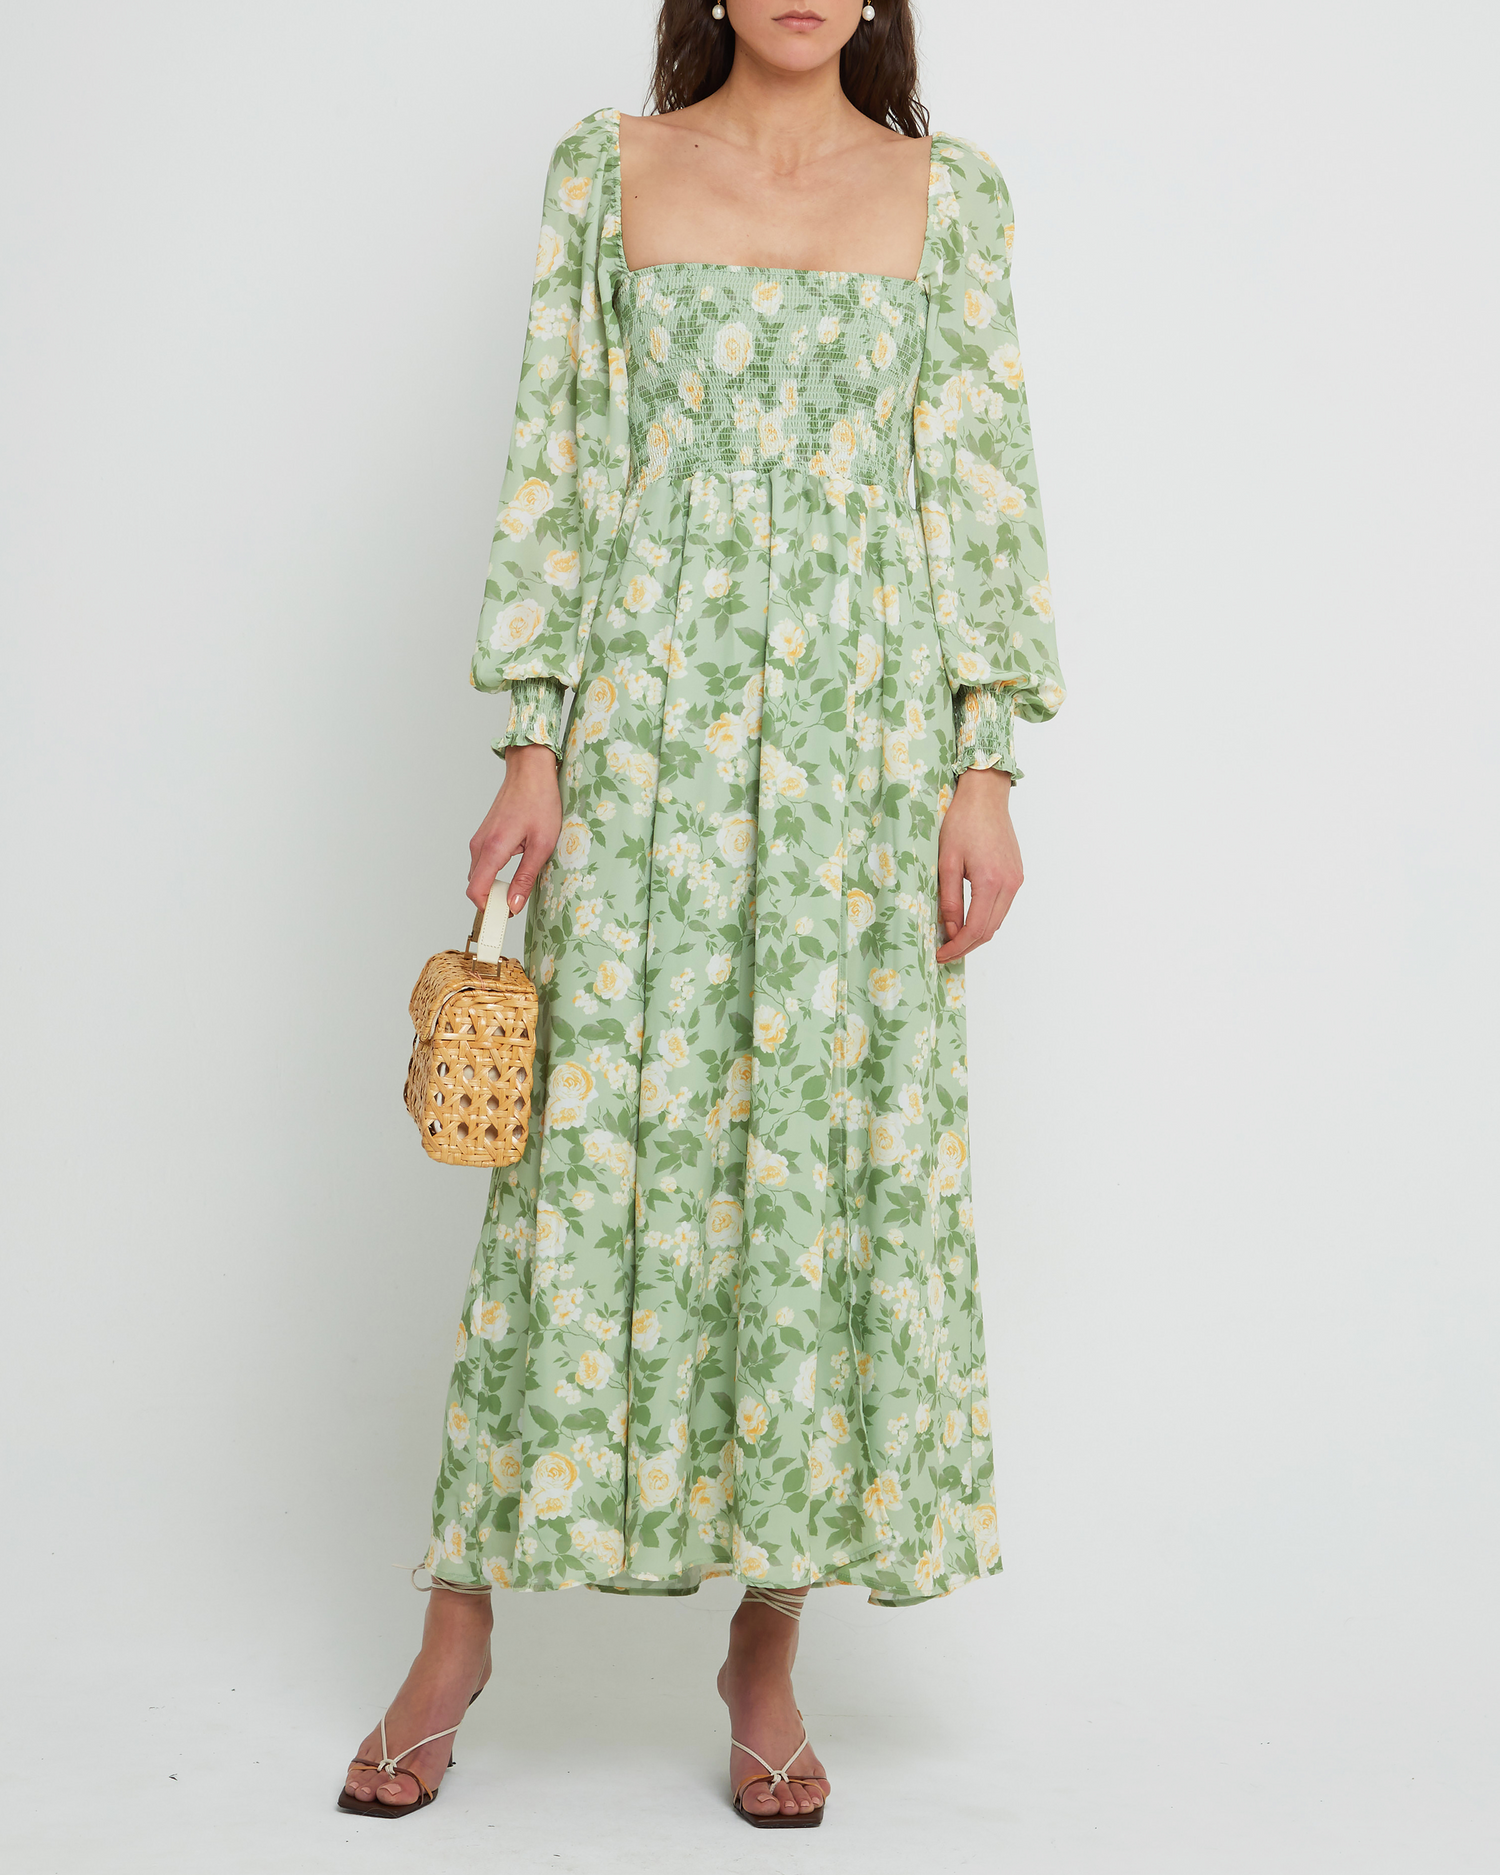 Fourth image of Classic Smocked Maxi Dress, a floral maxi dress, side slit, long, sheer sleeves, puff sleeves, square neckline, smocked bodice